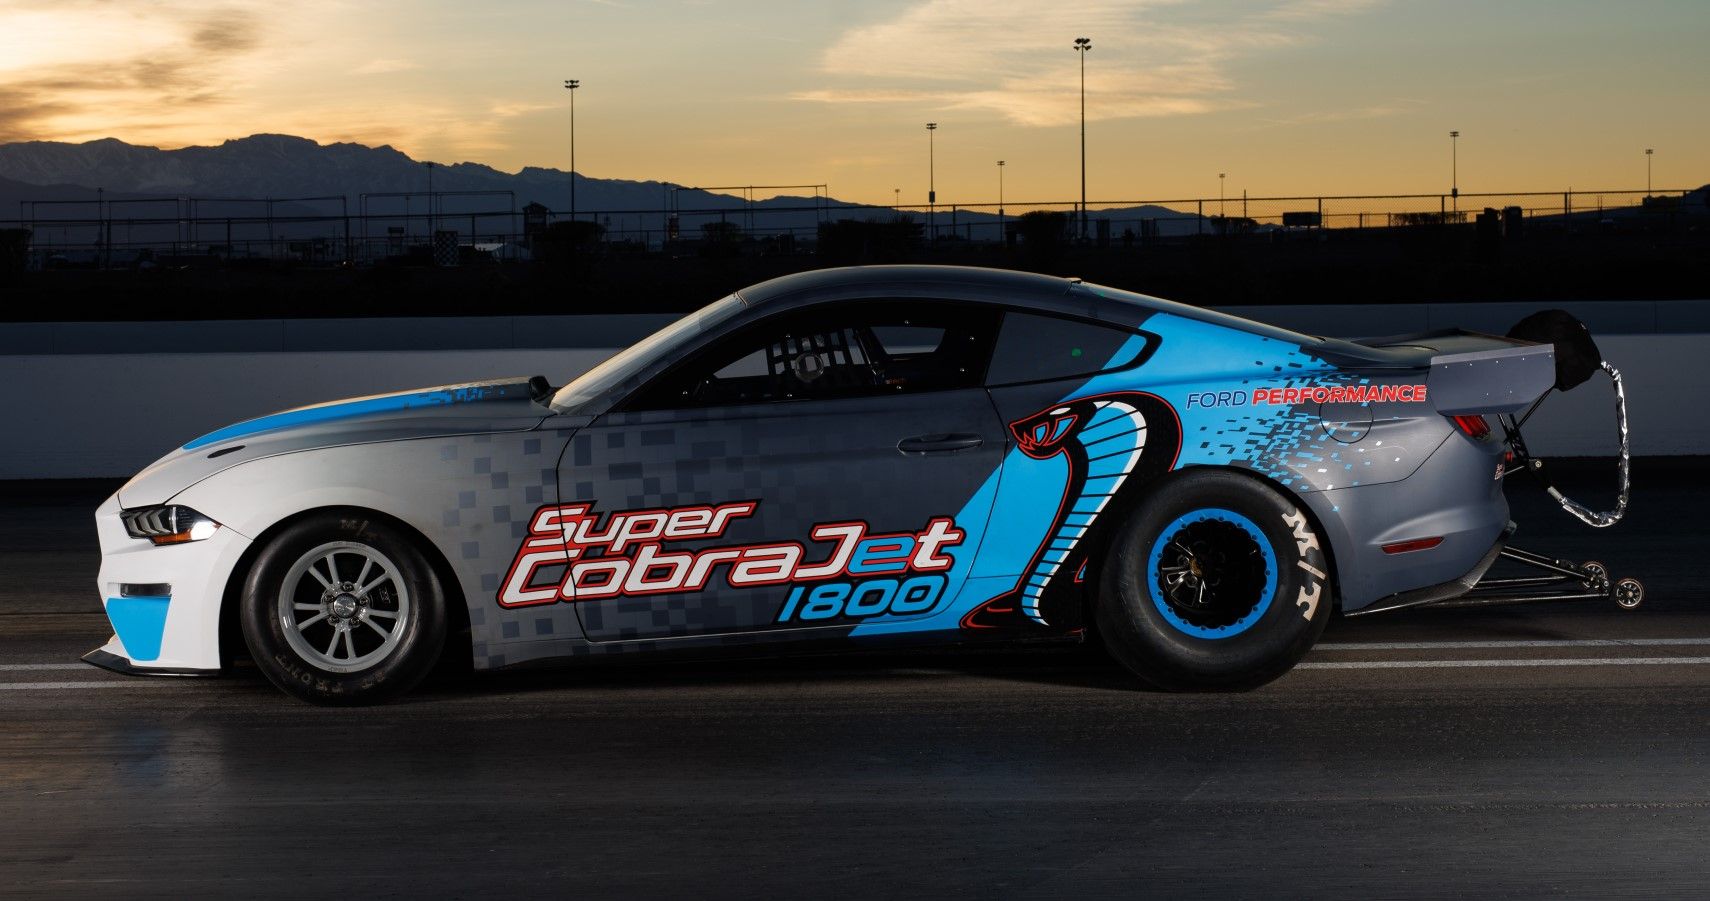 1800-HP Ford Mustang Super Cobra Jet side view on a drag strip